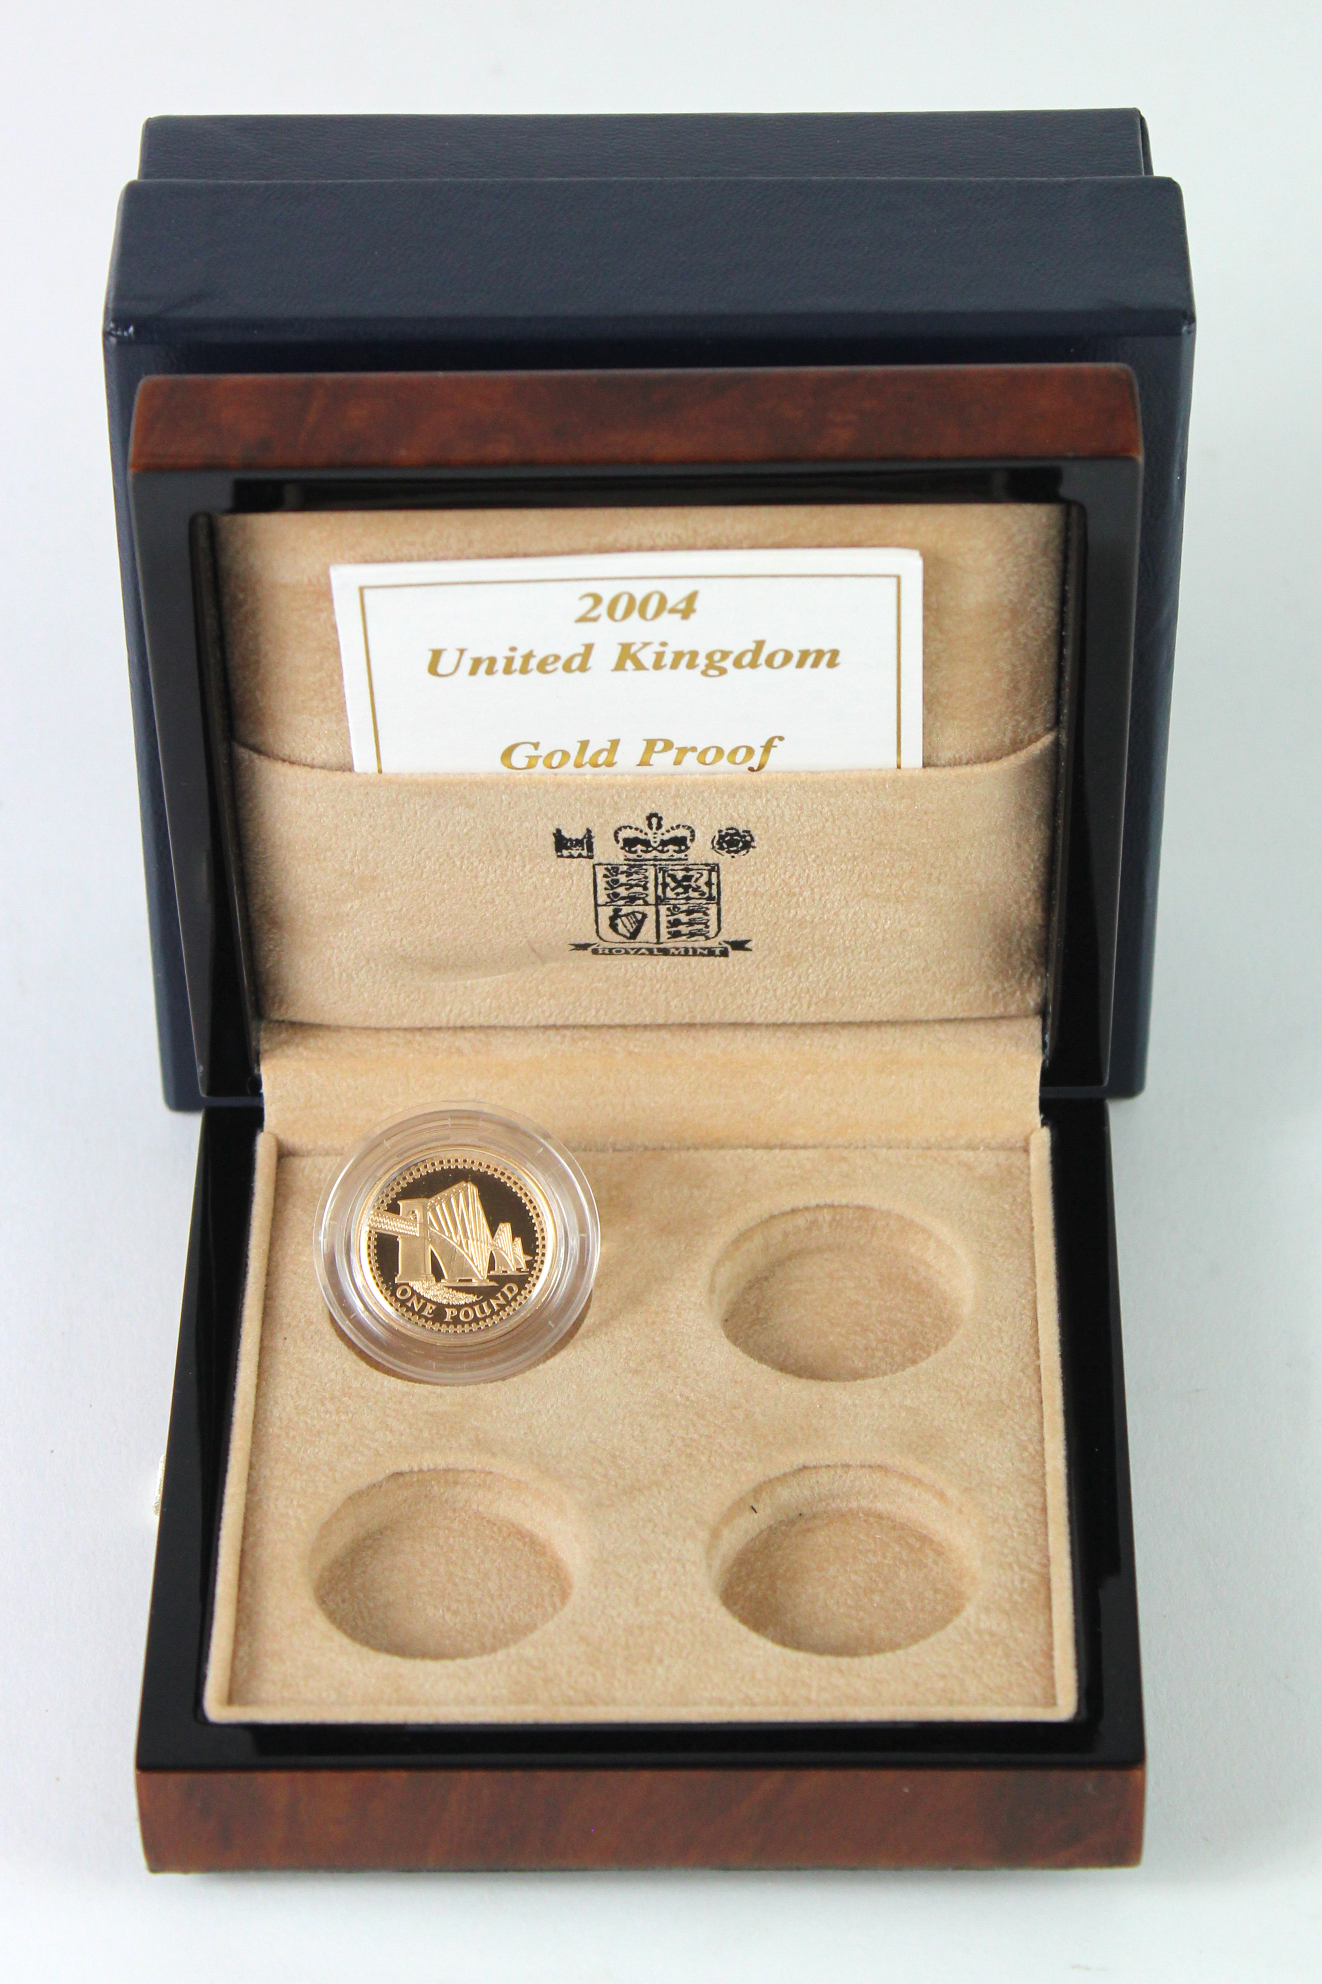 One Pound 2004 "Bridges" gold proof. FDC with certificate in the four coin box set (missing the